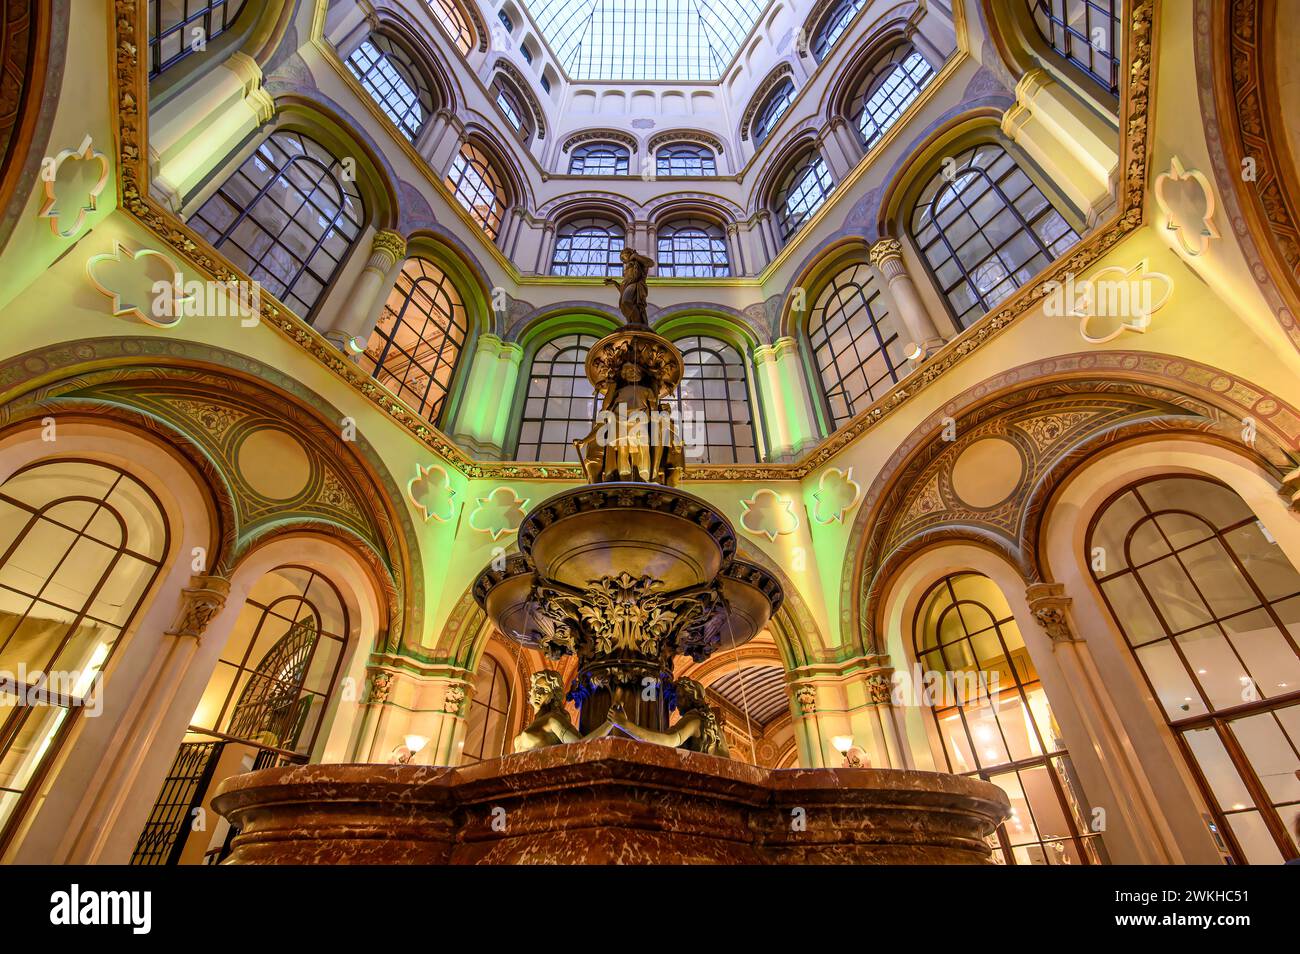 Vienna, Austria. Inside the Ferstel Passage, Palais Ferstel. A typcial viennese 'Kaffeehaus' (coffee house). Located in the inner city district. Stock Photo